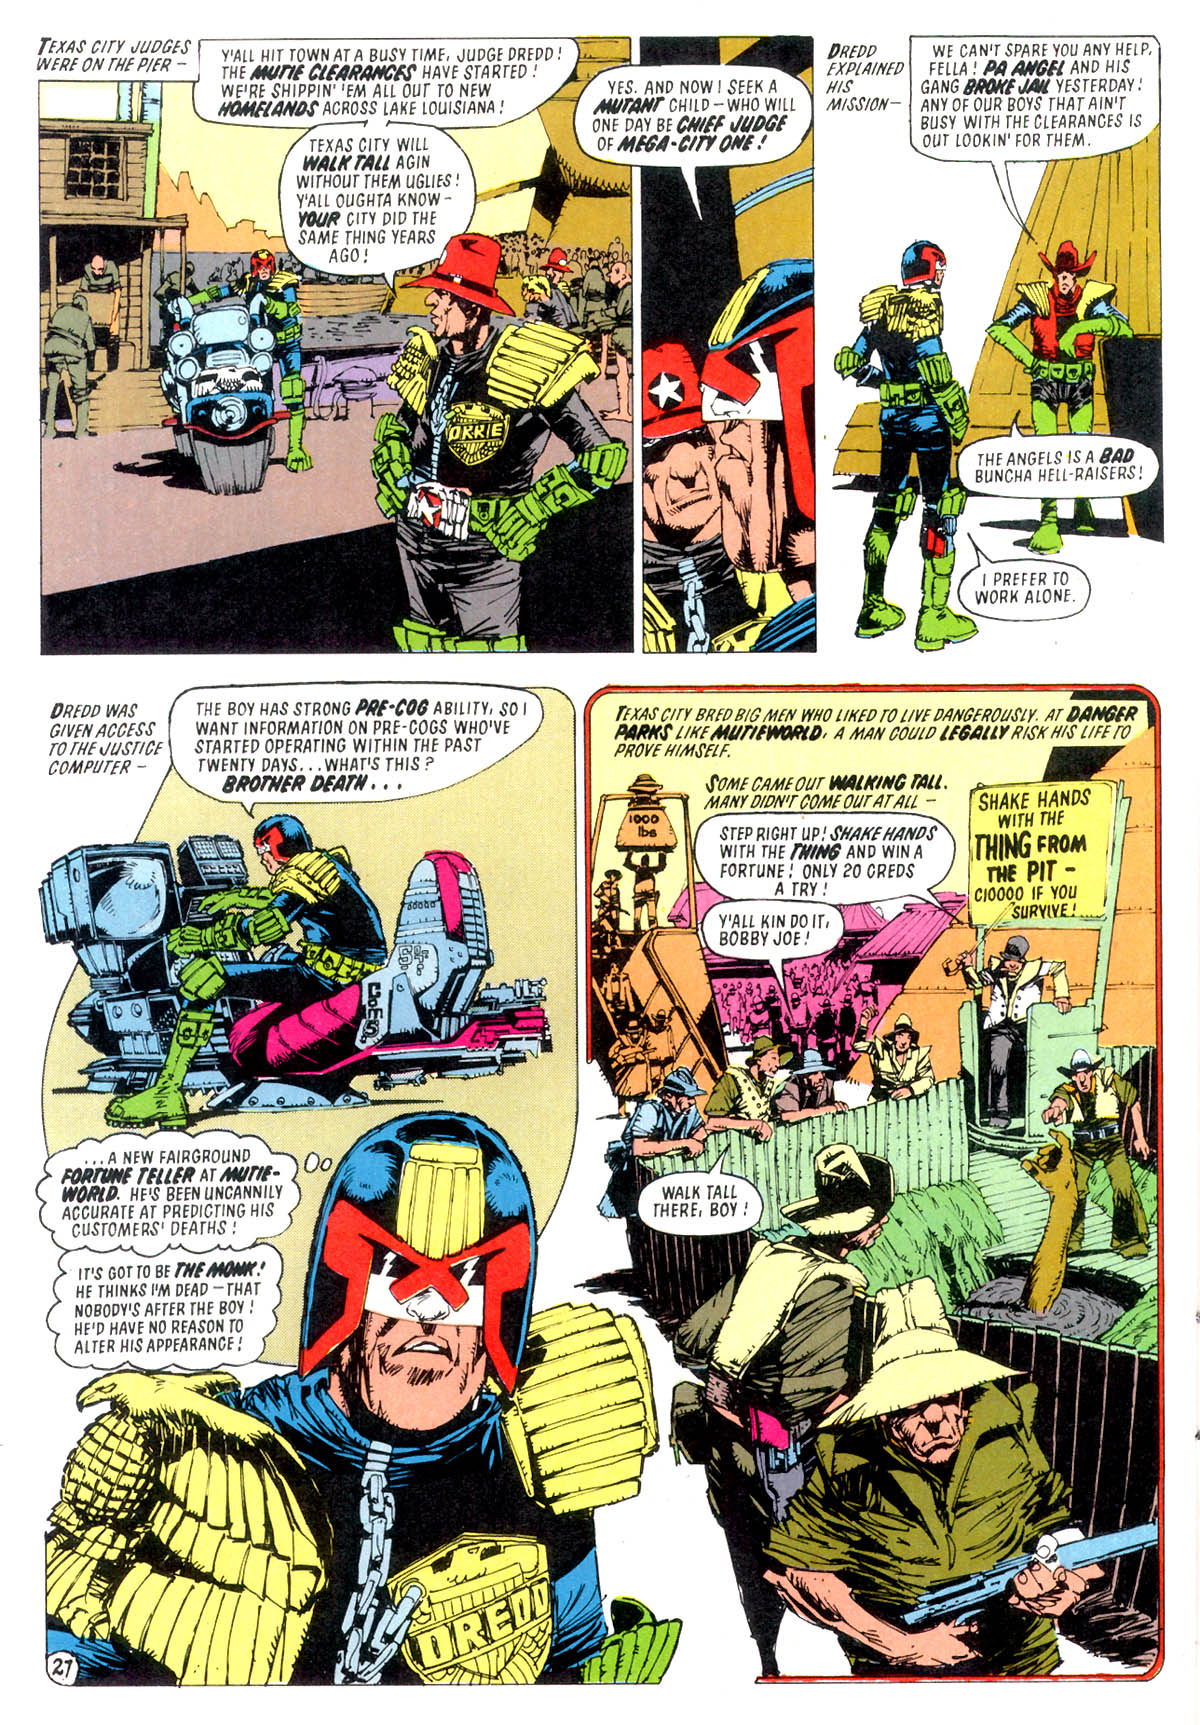 Read online Judge Dredd: The Complete Case Files comic -  Issue # TPB 4 - 26